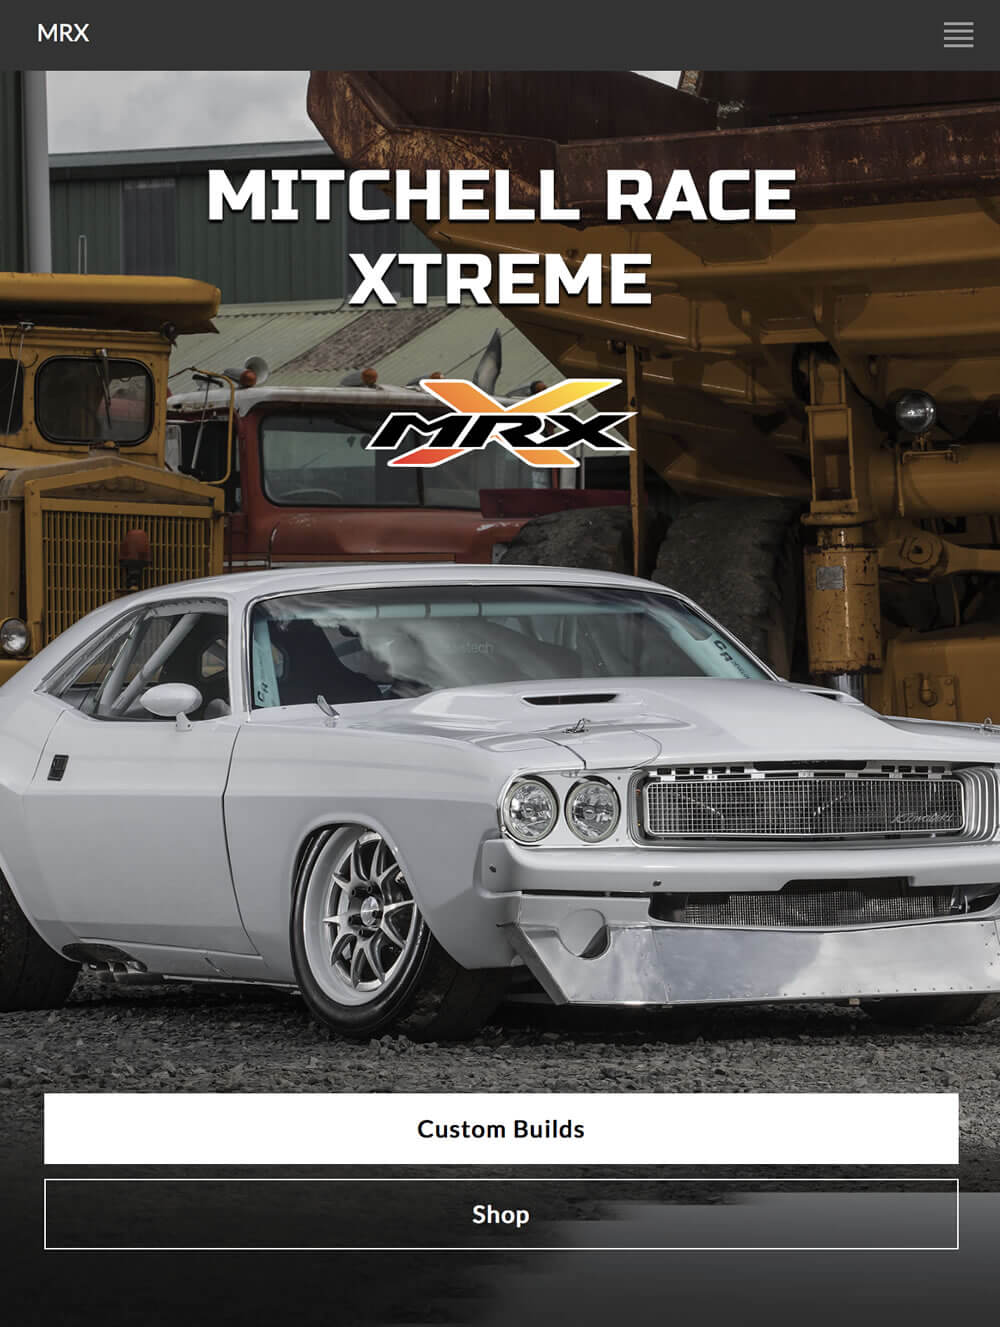 Mitchell Race Xtreme website by Piccante Web Design